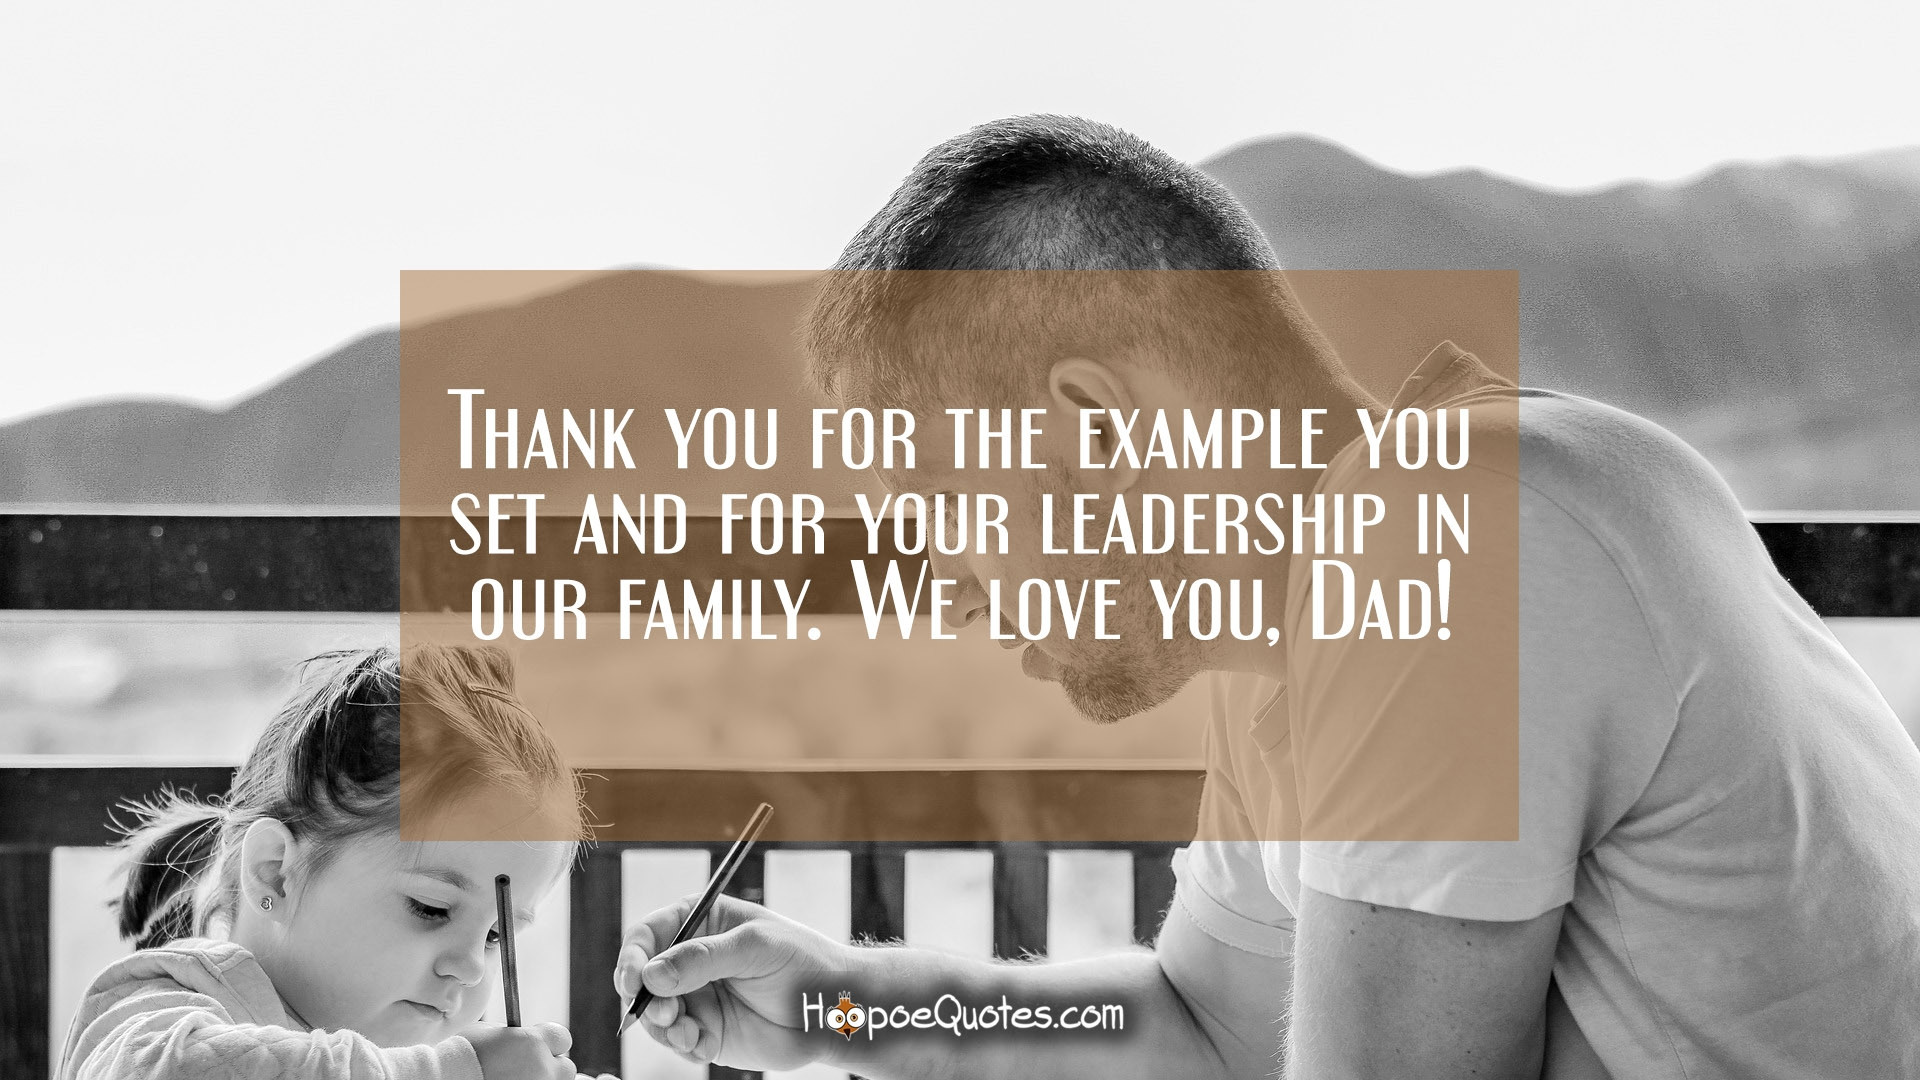 Thank You Leadership Quotes
 Thank you for the example you set and for your leadership